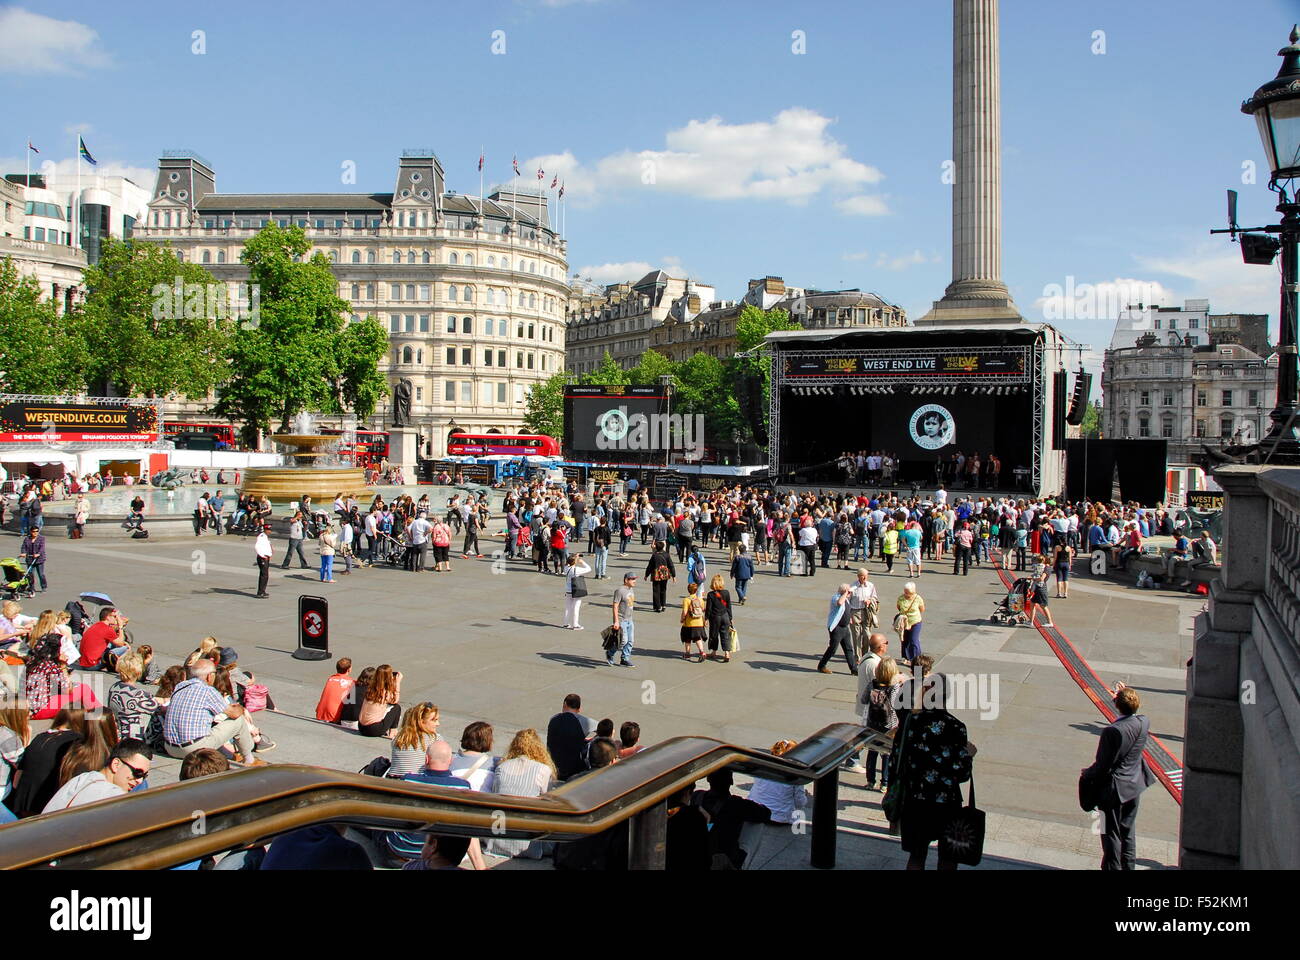 West End Live stage in Trafalgar Square in London, England, UK Stock Photo